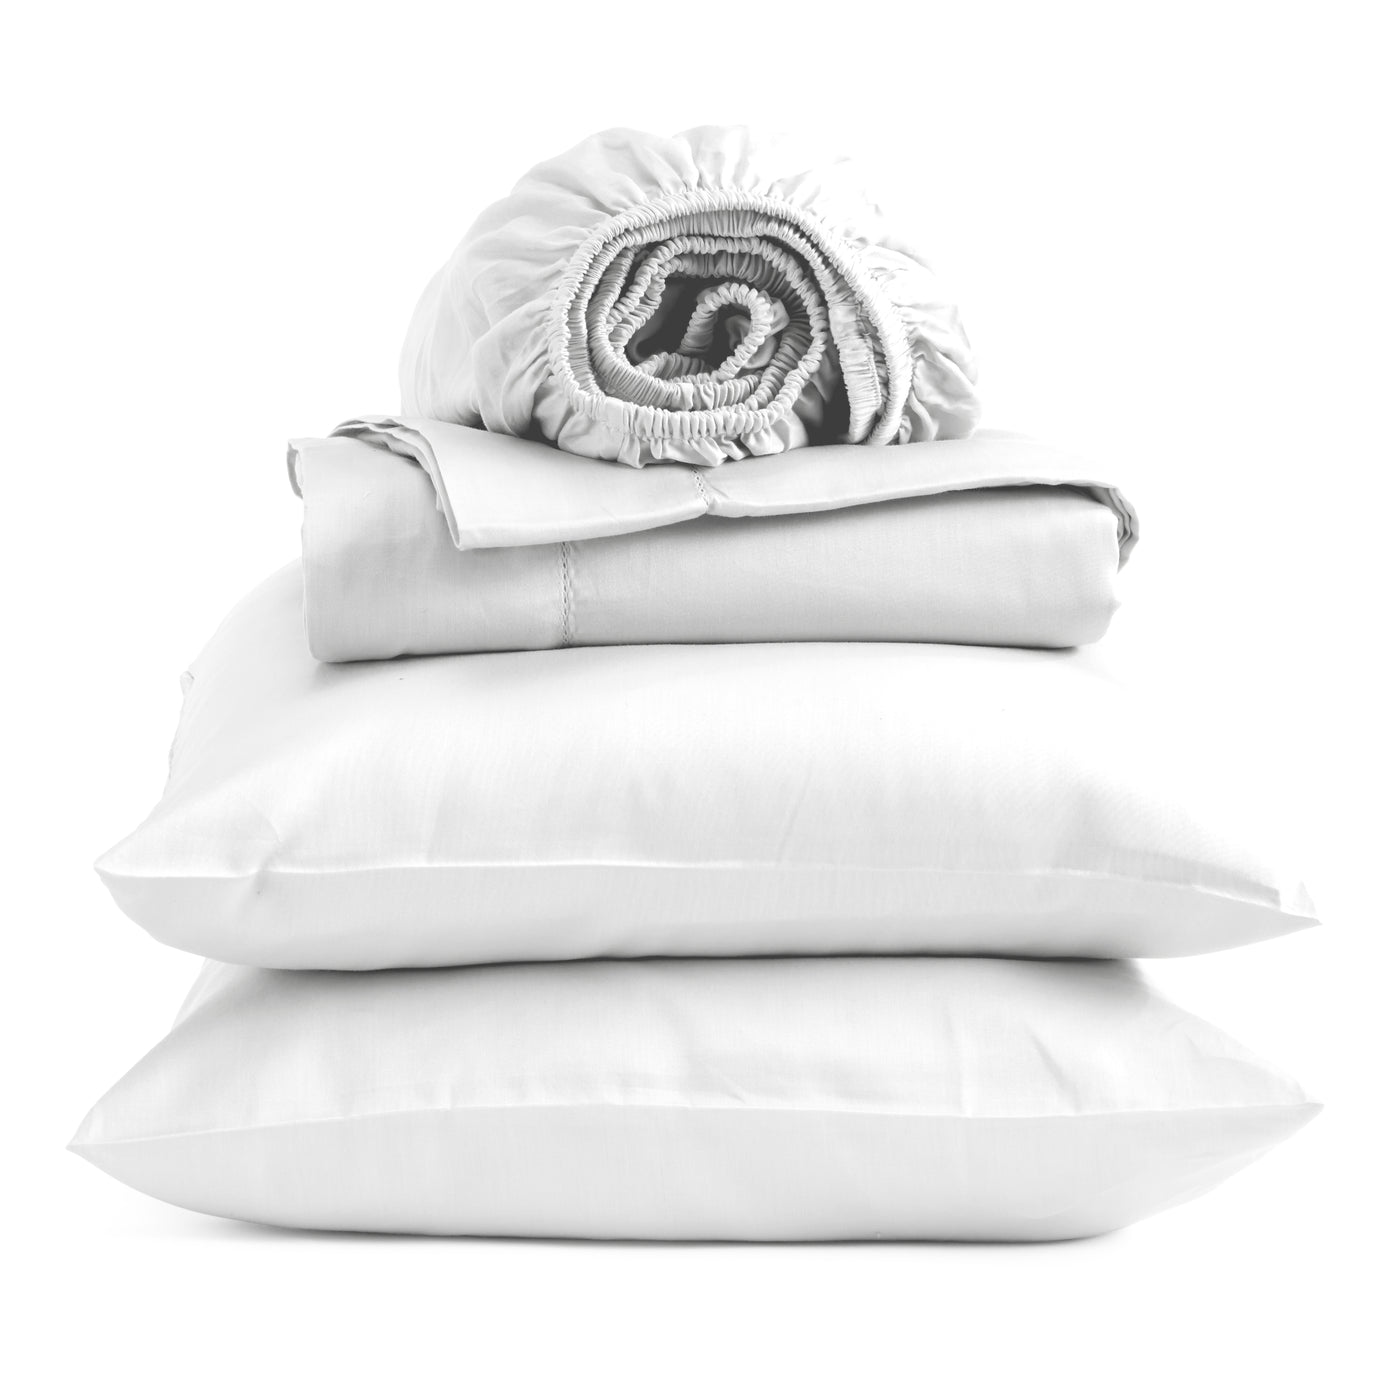 100% Organic Cotton Sheet Set - 300 Thread Count - Bedding Sheets & Pillowcase - Suitable for a 15-18" Mattress  - Snow White  - GOTS Certified - Comfort & Care Collection